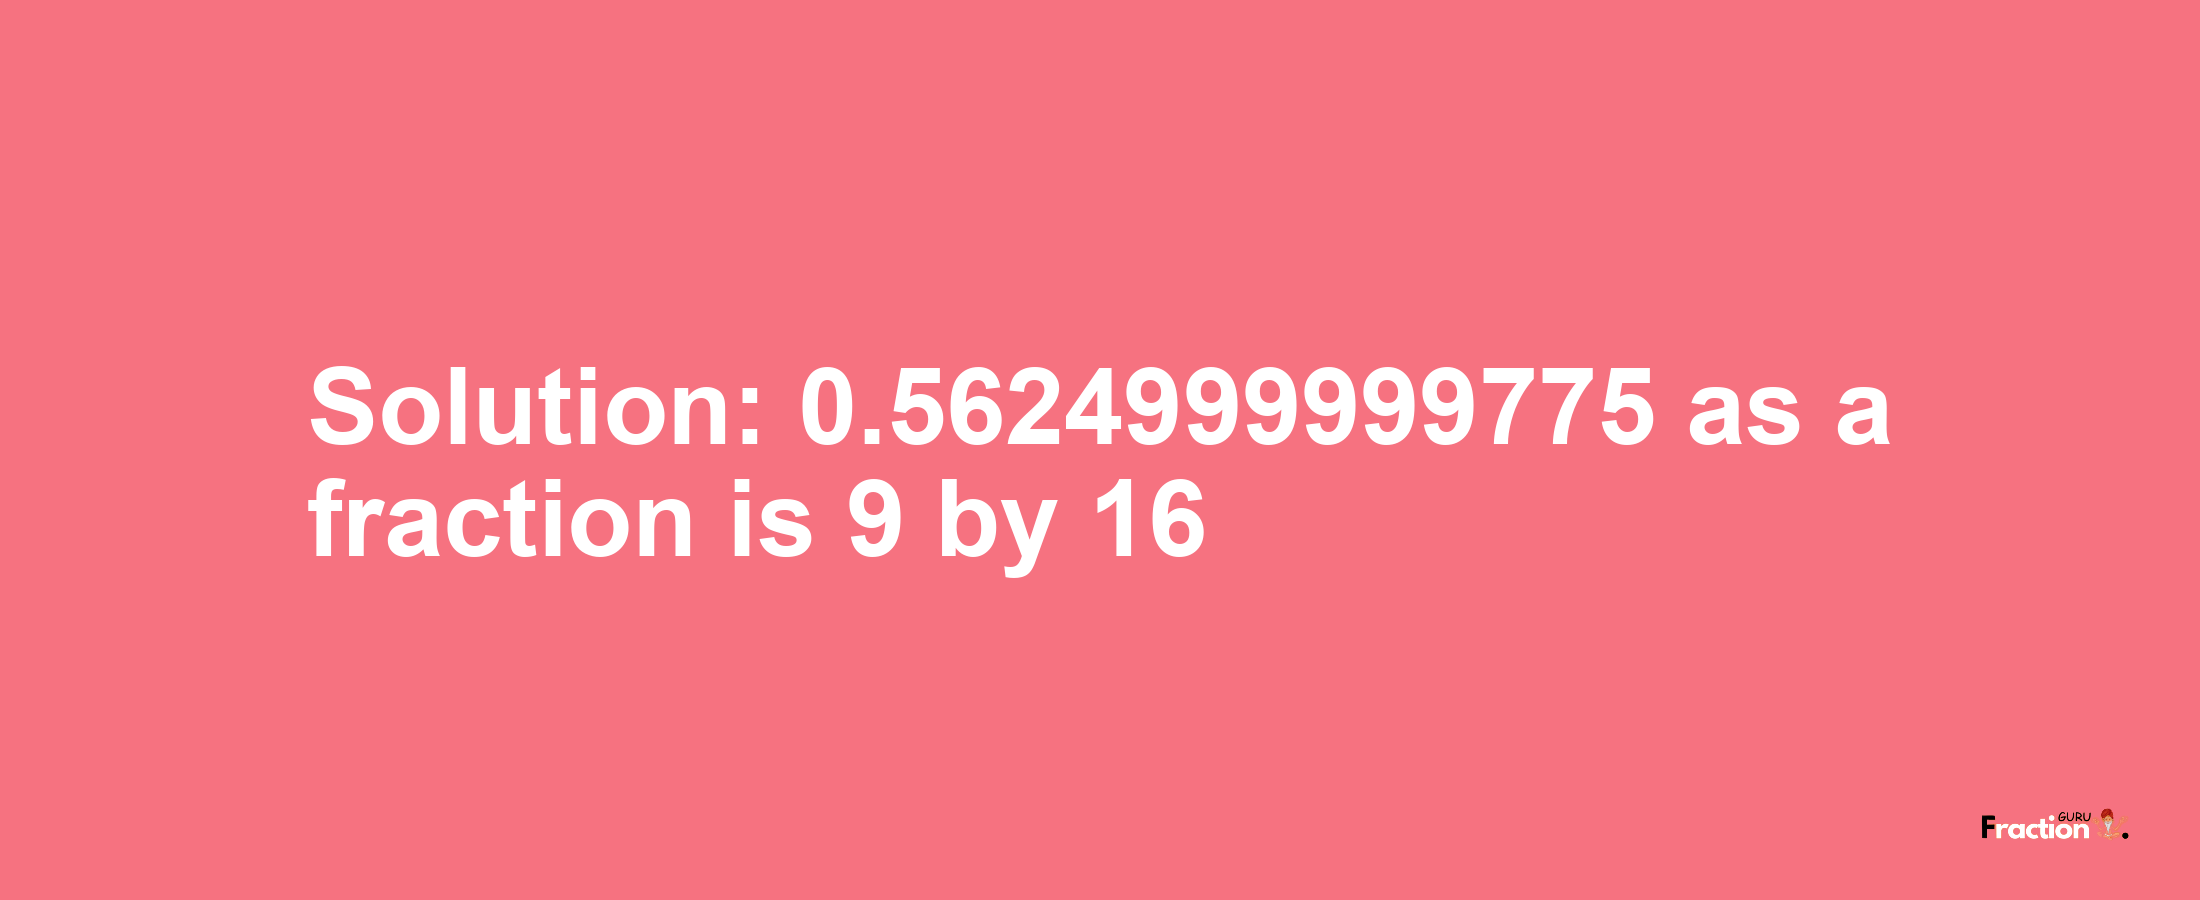 Solution:0.5624999999775 as a fraction is 9/16